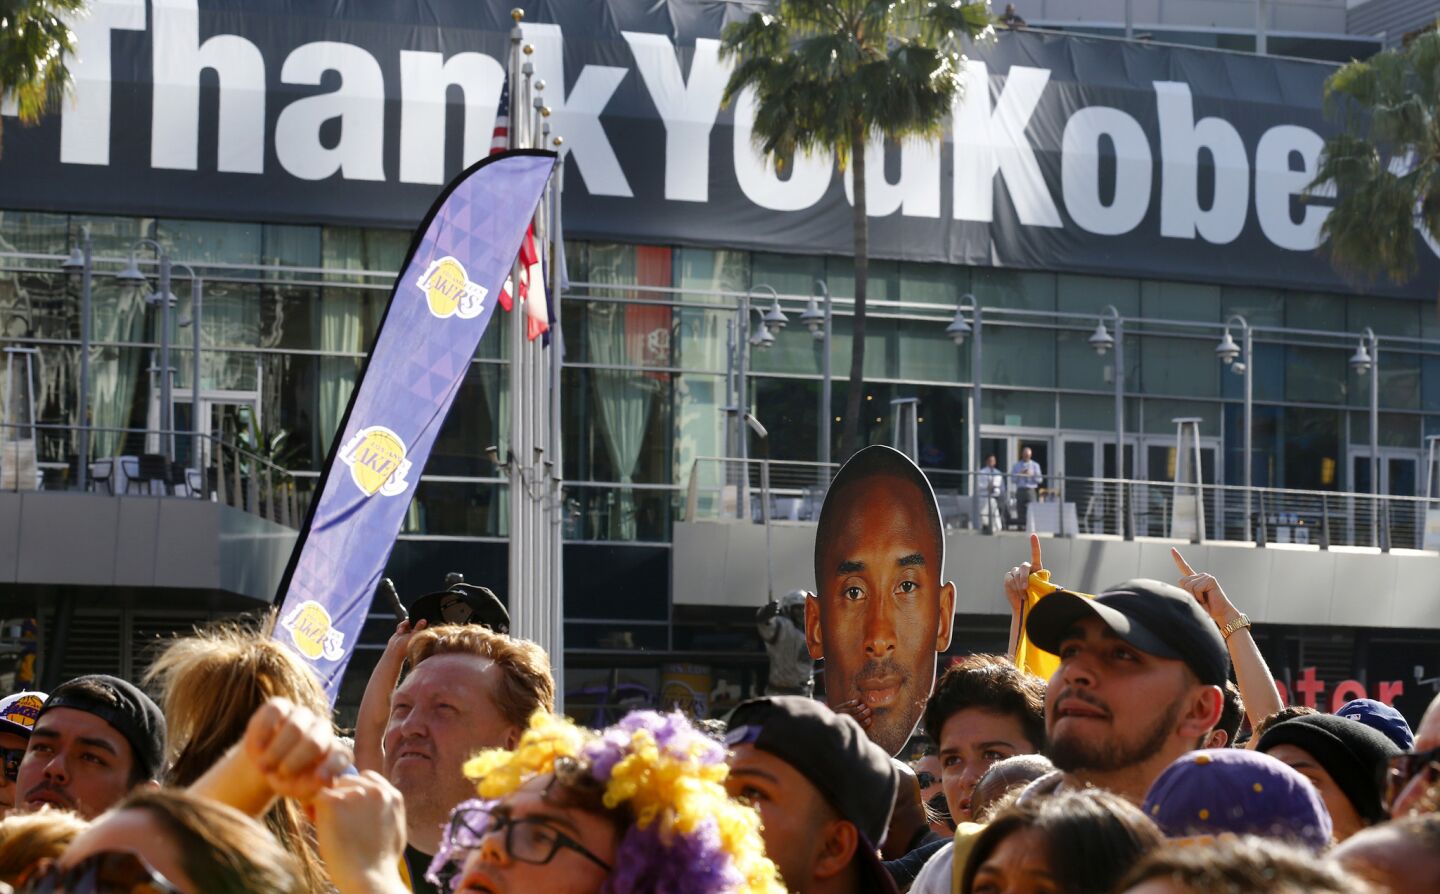 Fans gather outside Staples Center before Kobe Bryant's final game in a Laker uniform.